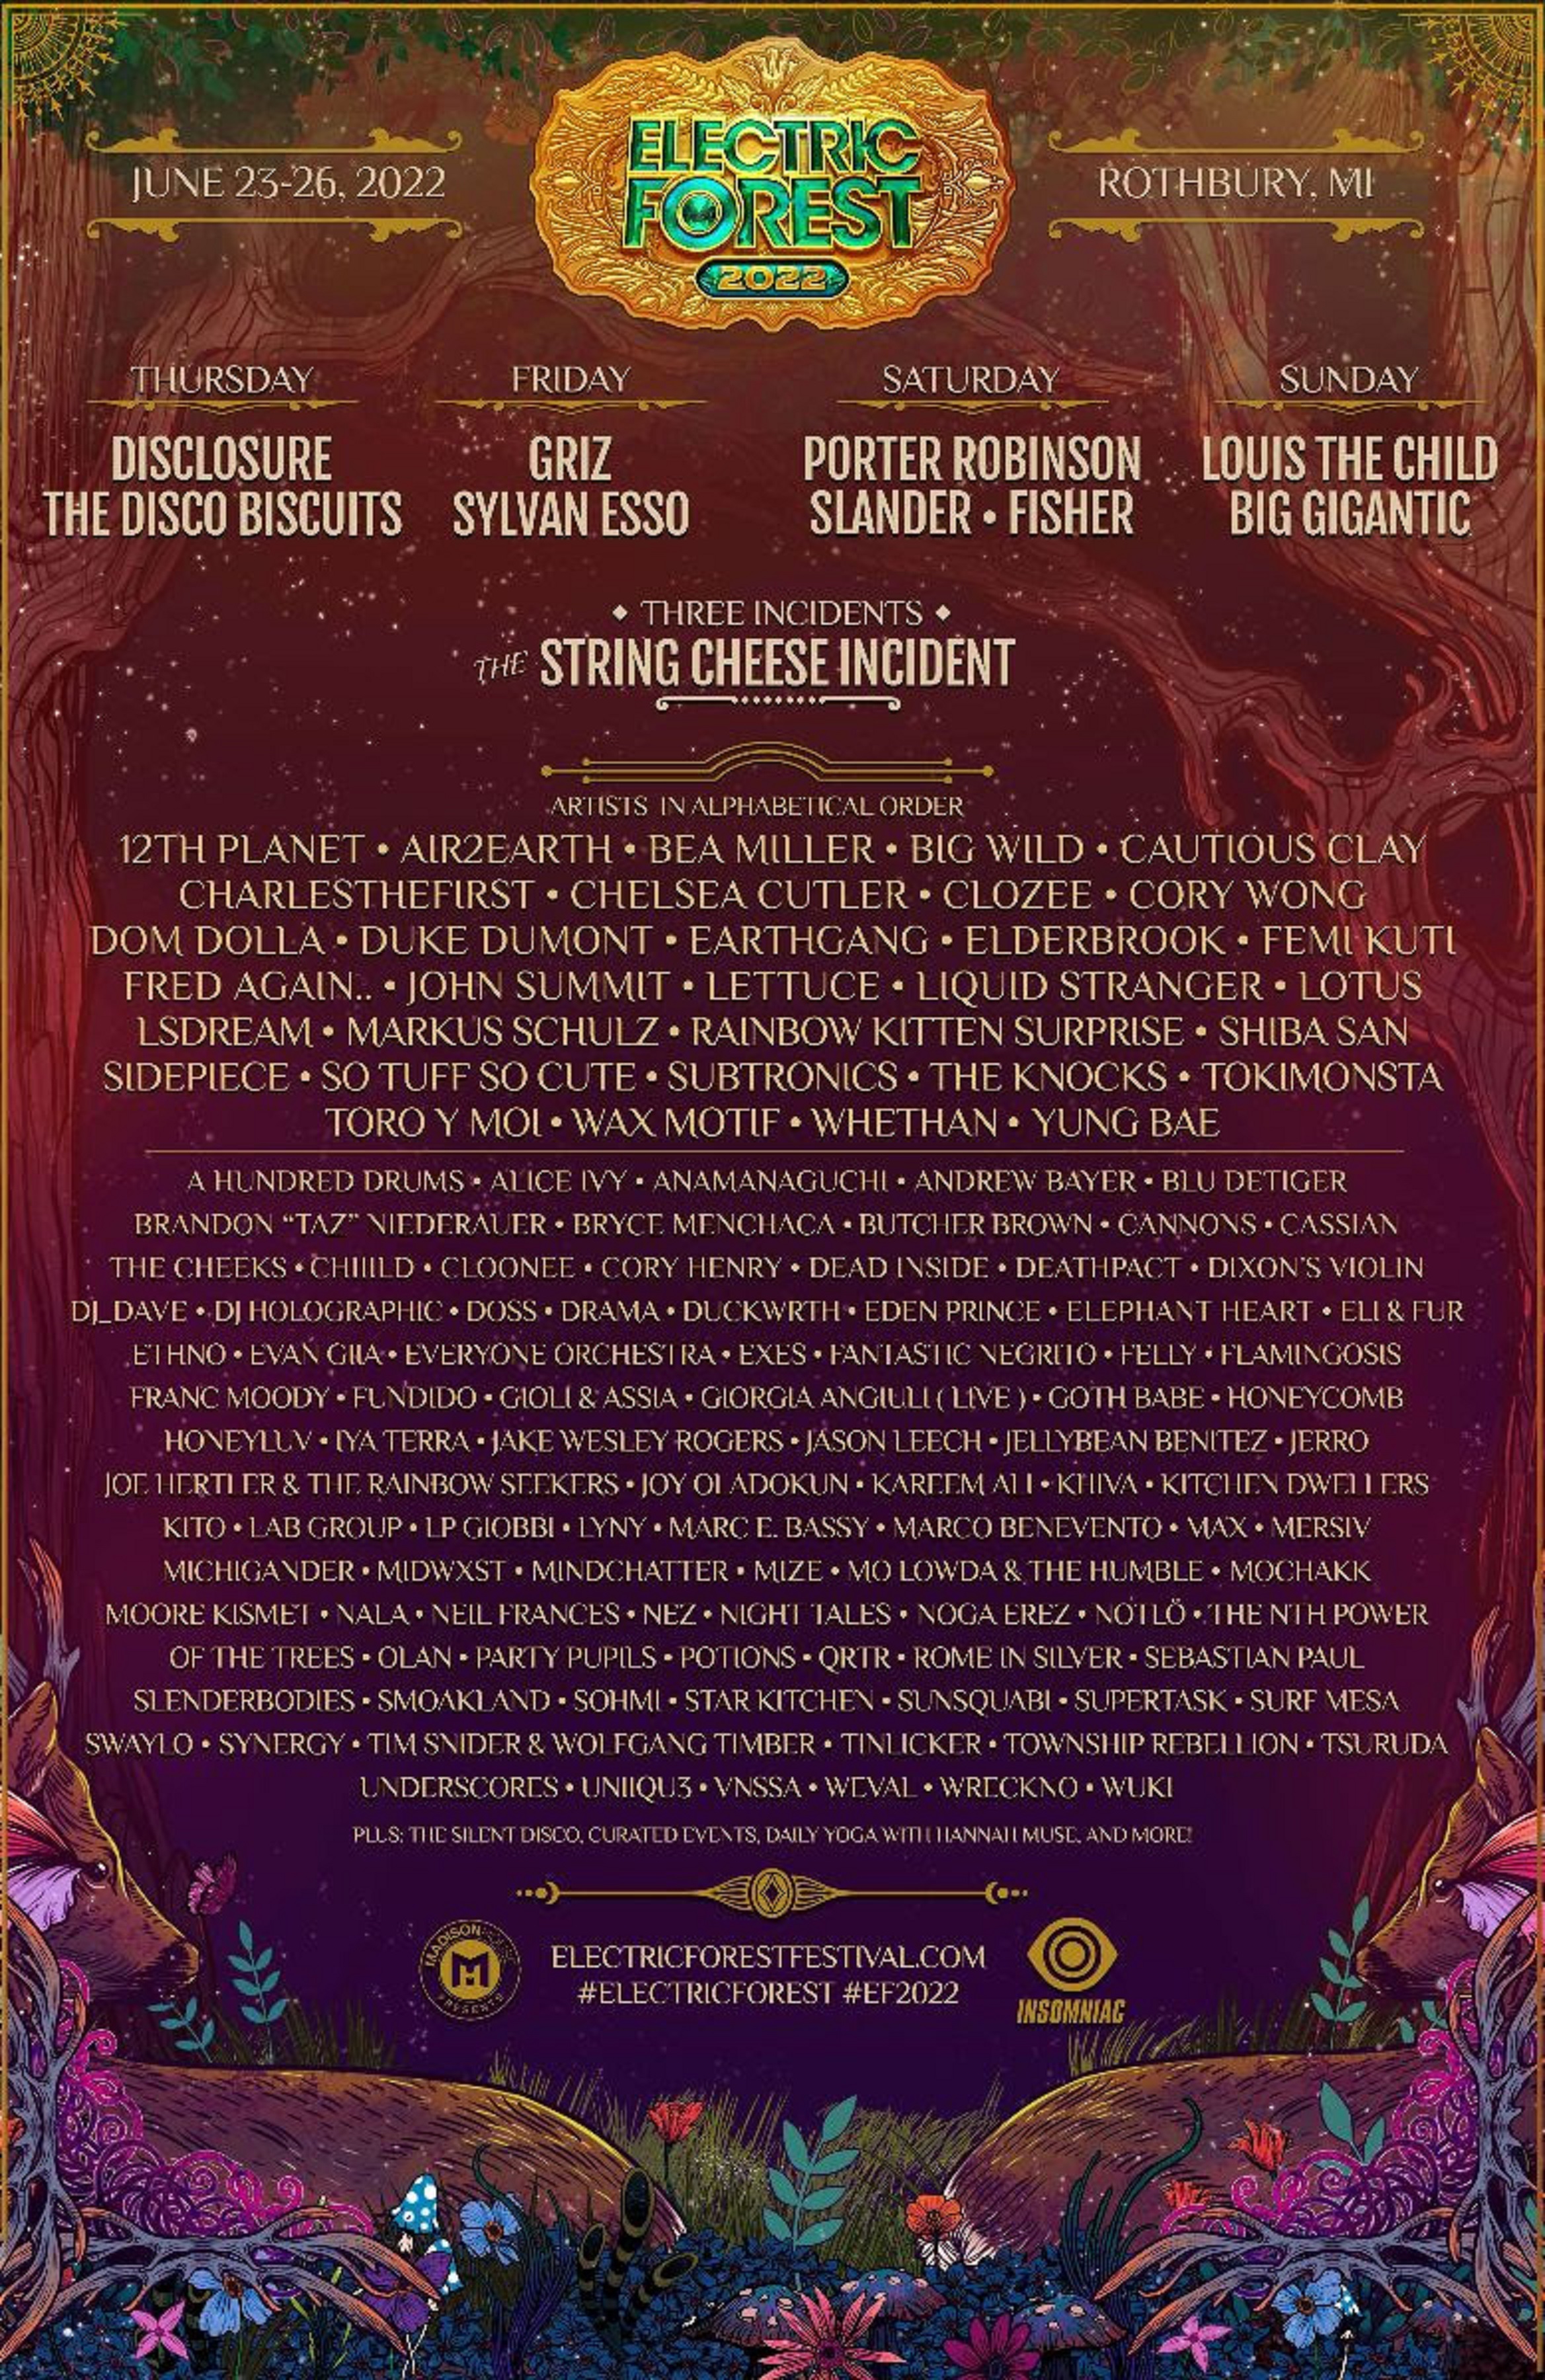 Electric Forest Reveals Additional Artists to the 2022 Festival Lineup